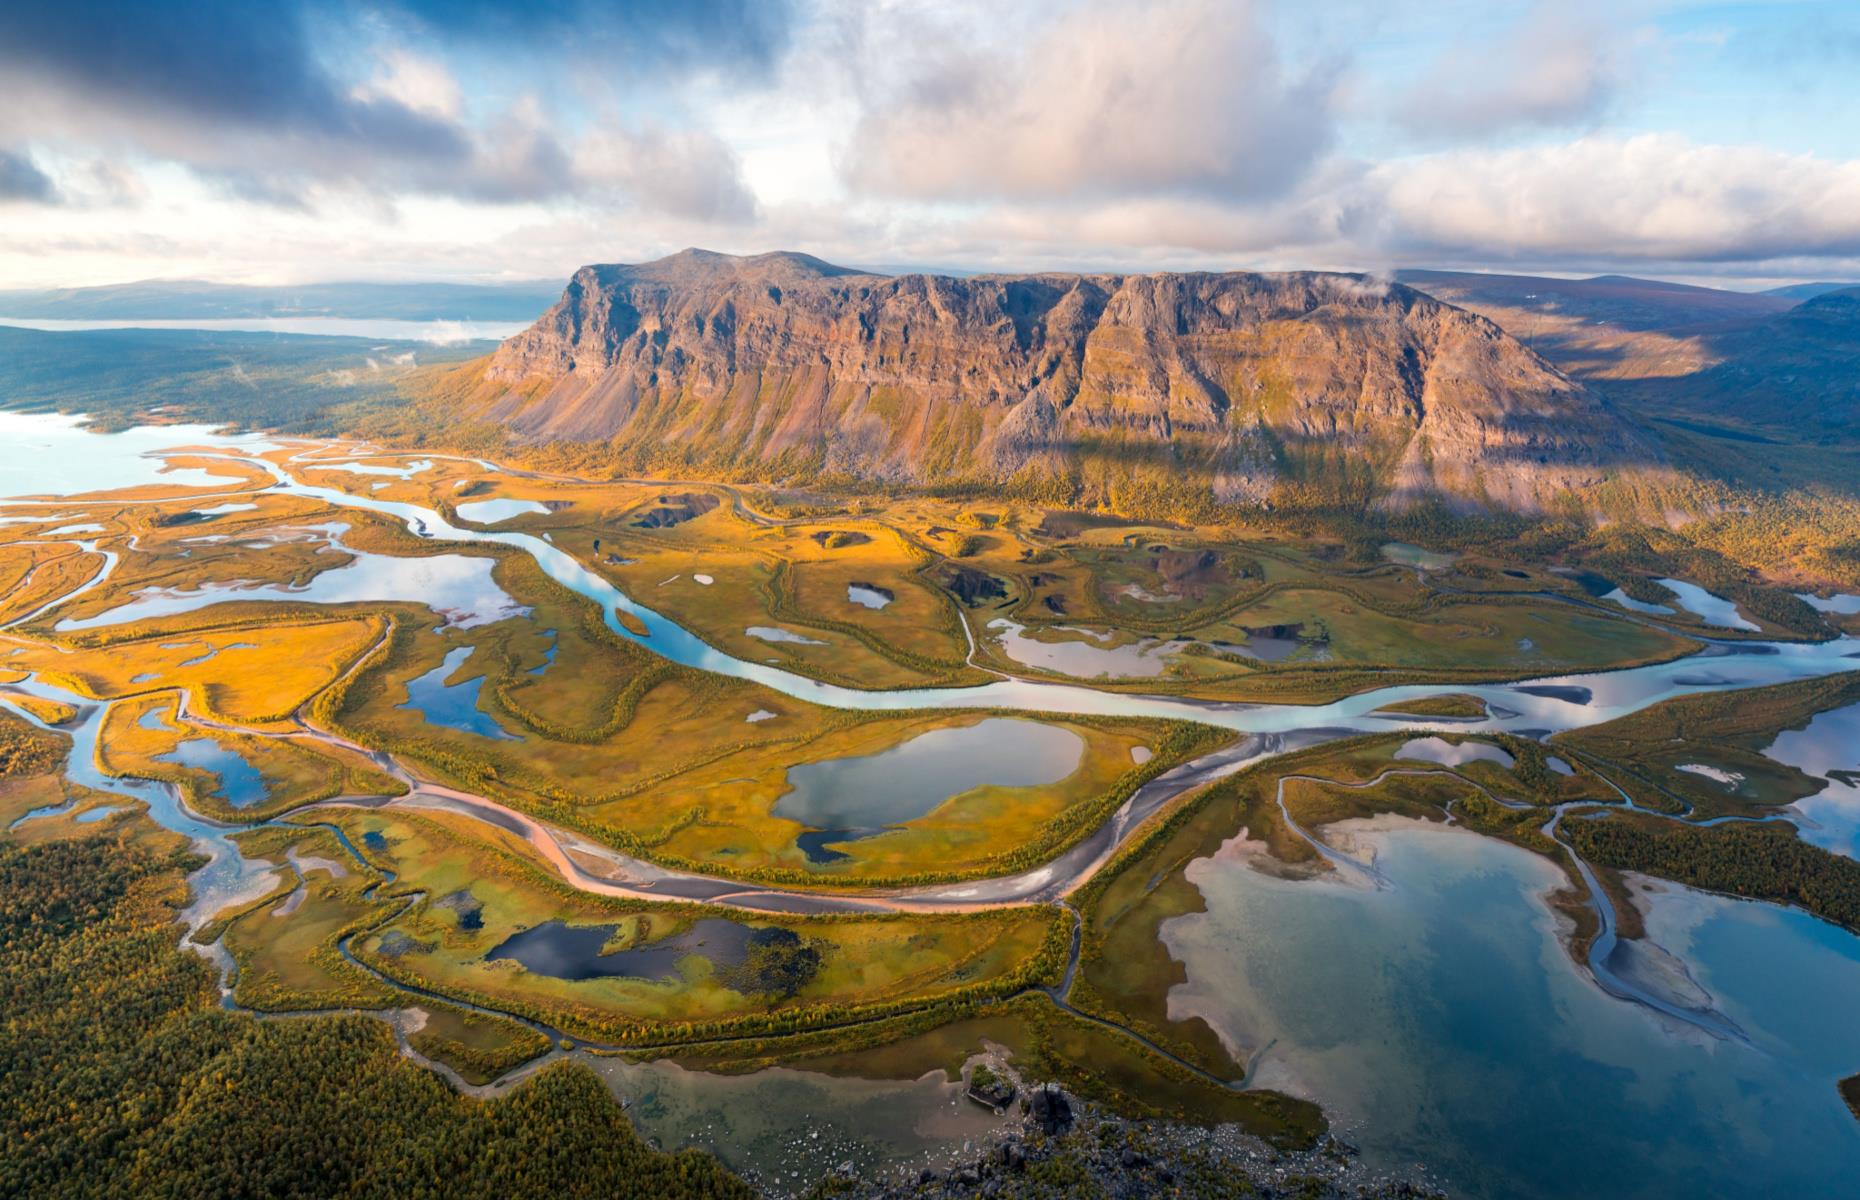 <p>Located in the otherworldly Lapland, <a href="https://www.nationalparksofsweden.se/choose-park---list/sarek-national-park/">Sarek</a> is jam-packed with mountain peaks and peculiar-looking deltas that give the land a spectacularly eerie look. Getting to Sarek can be a bit of an ordeal and a trip to the park is not for the faint of heart, with visitors having to either hike or ski in. Once there, adventurers can hike on unmarked trails and truly feel like they’re at one with the wilderness.</p>